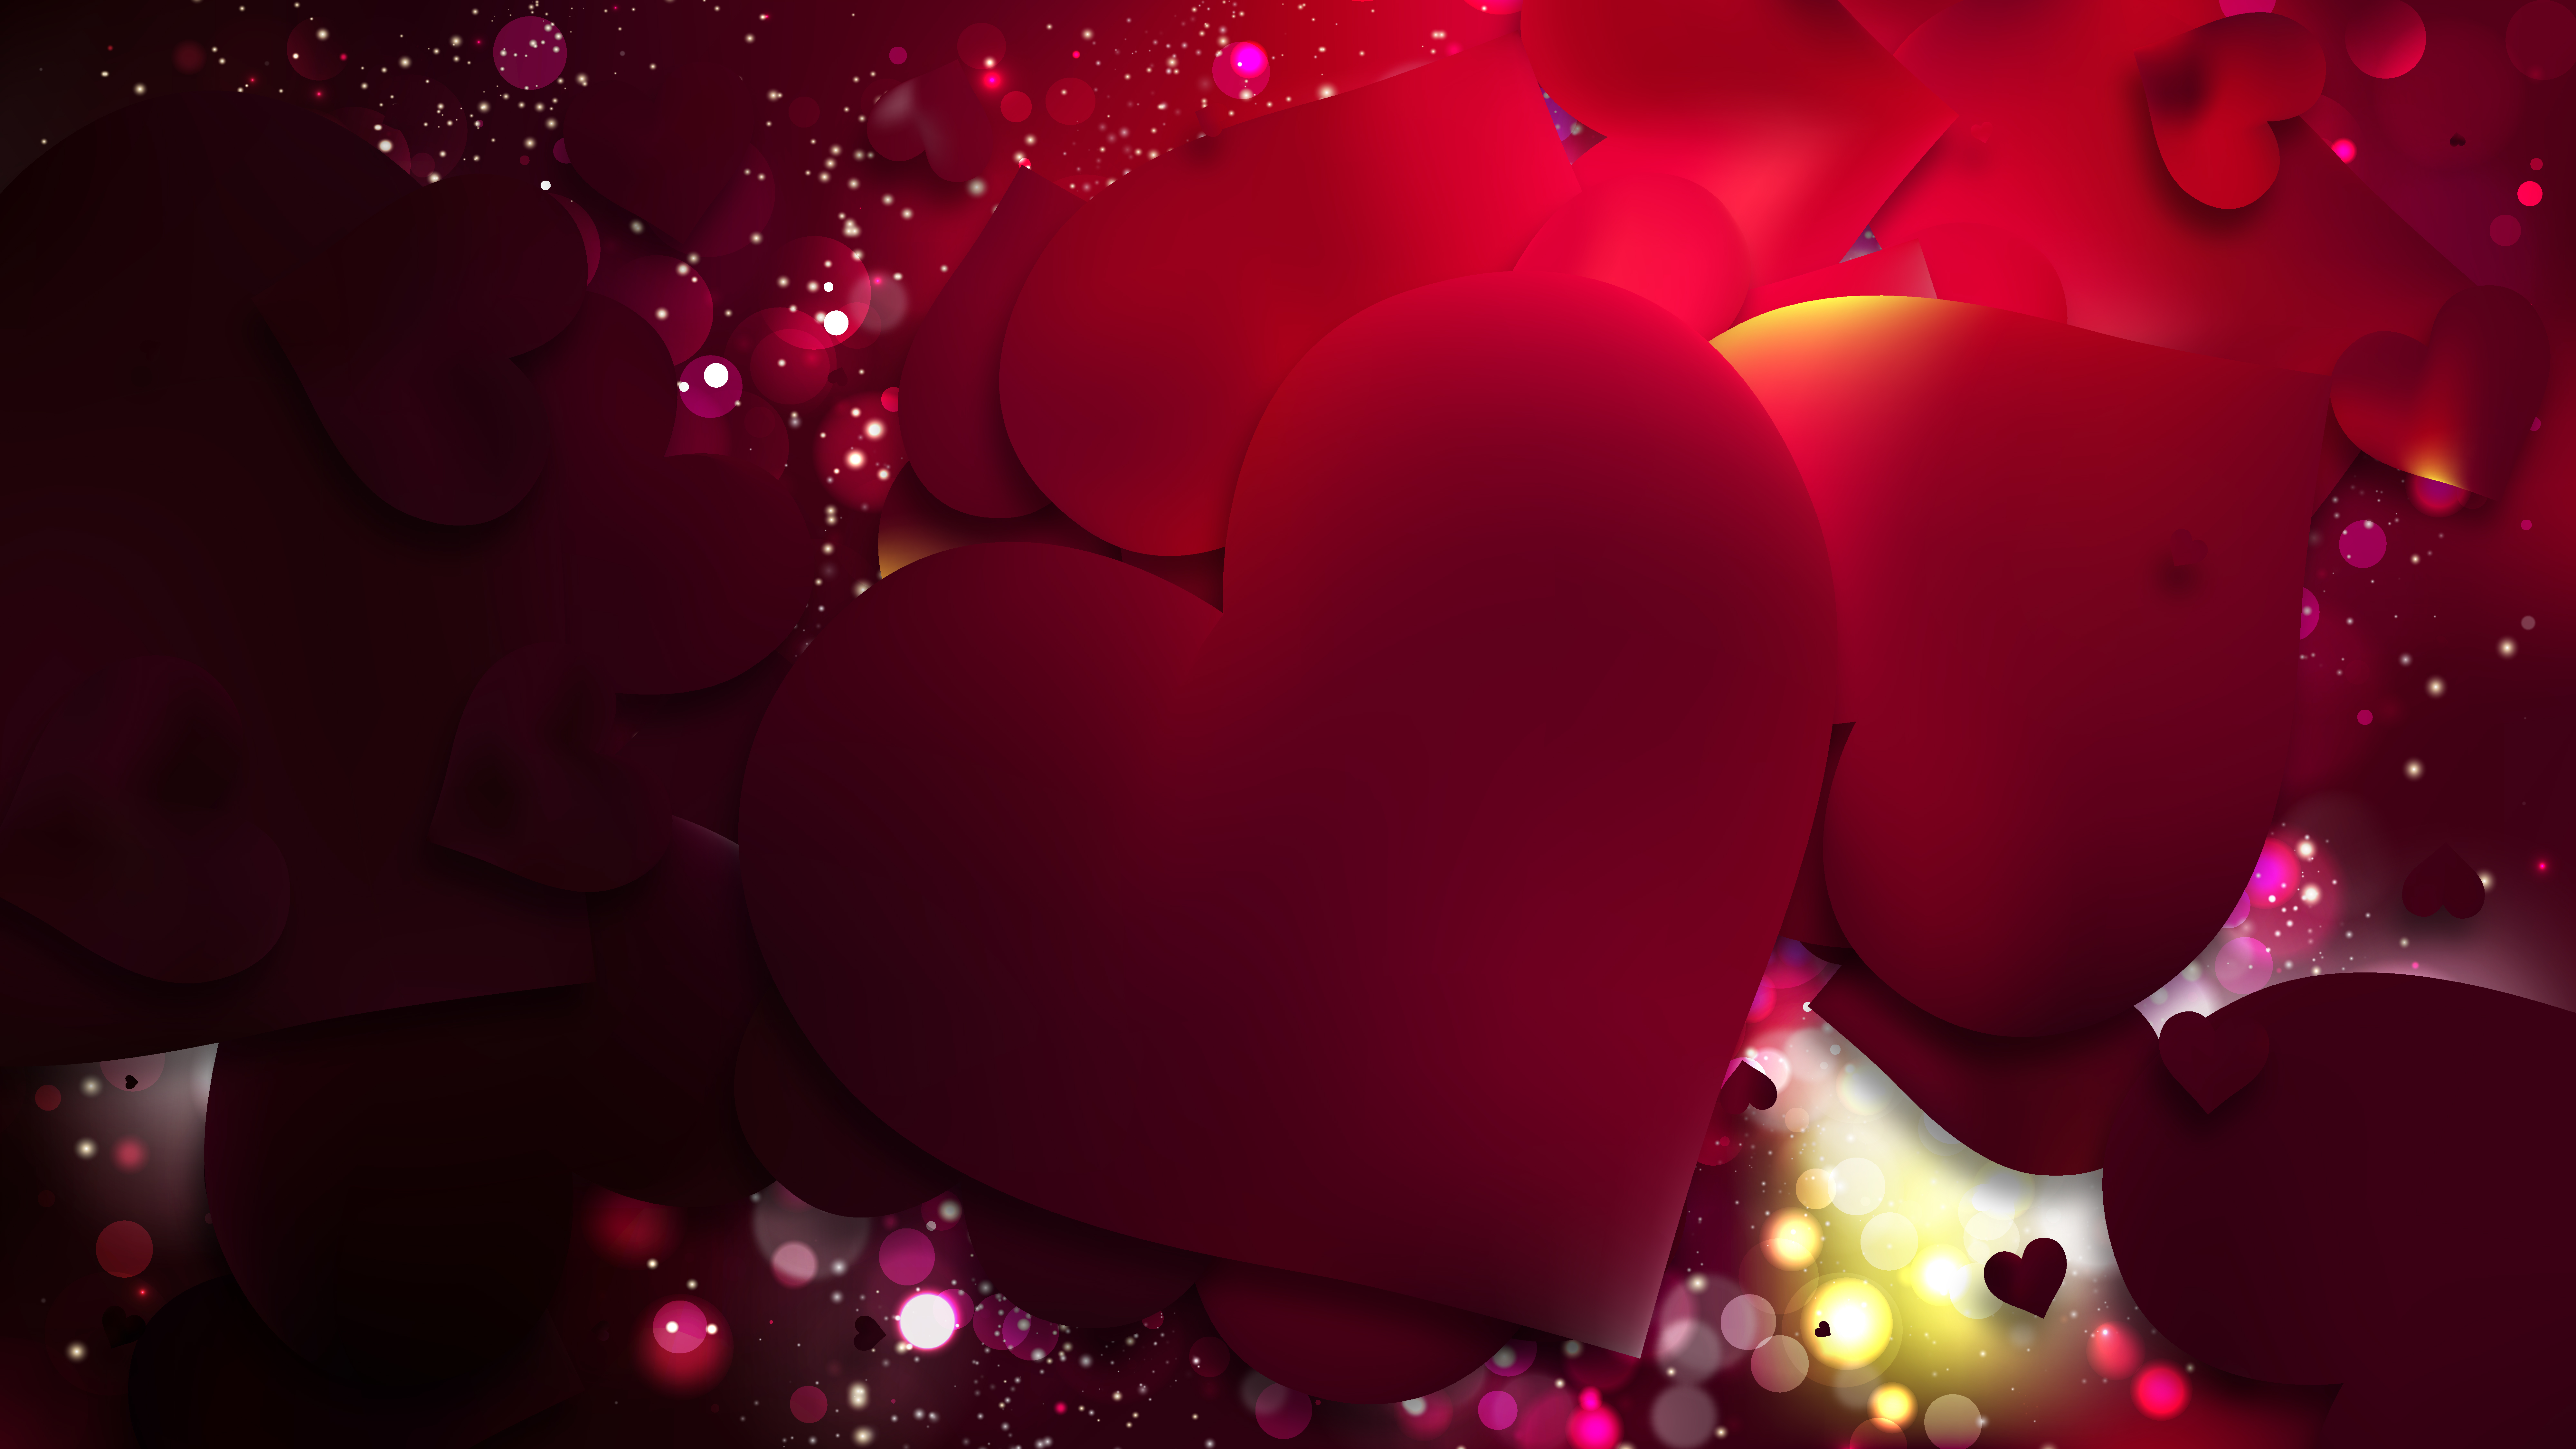 Free Red and Black Love Background Illustration